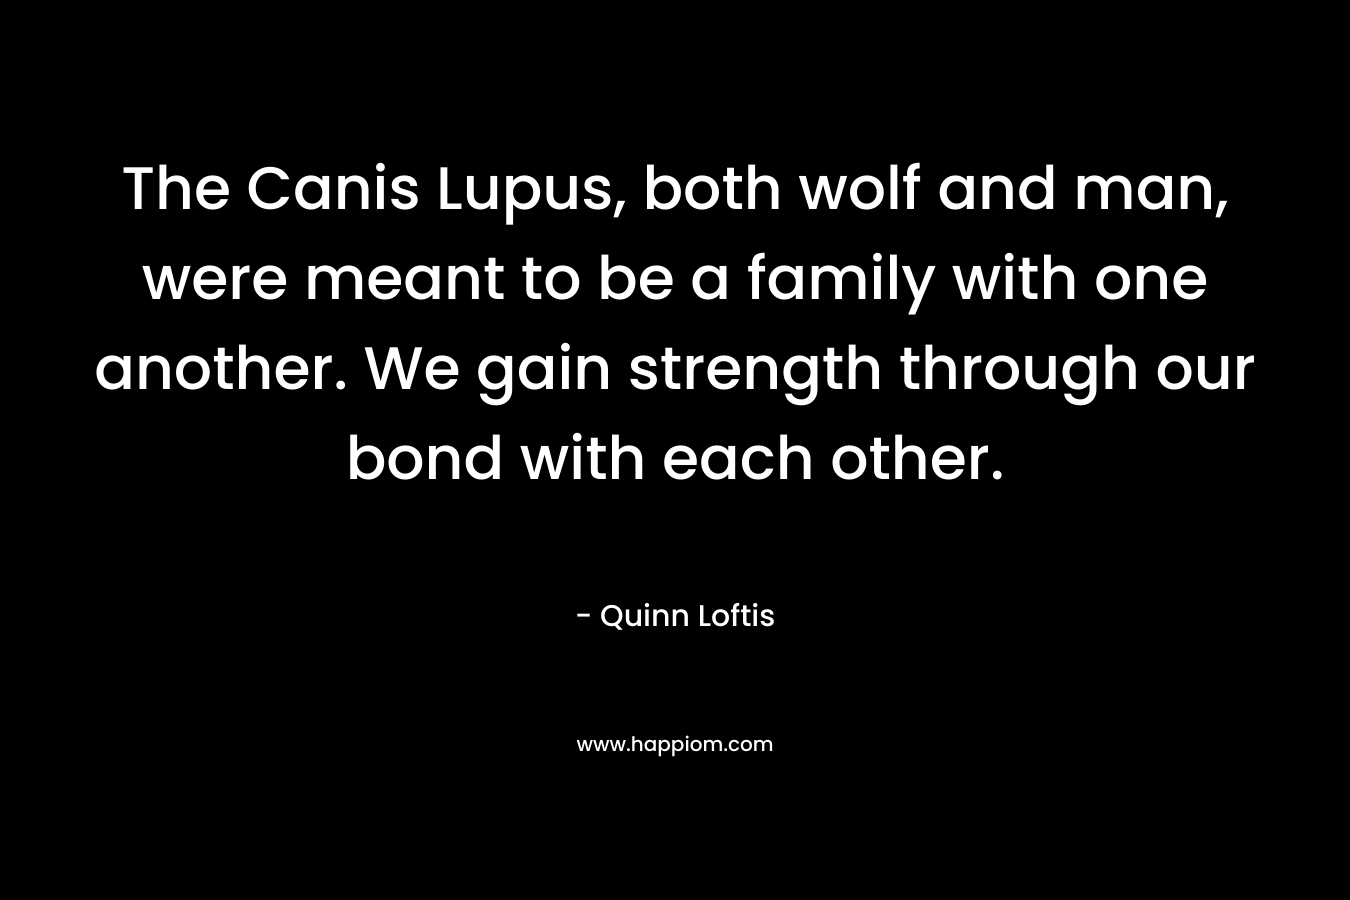 The Canis Lupus, both wolf and man, were meant to be a family with one another. We gain strength through our bond with each other. – Quinn Loftis